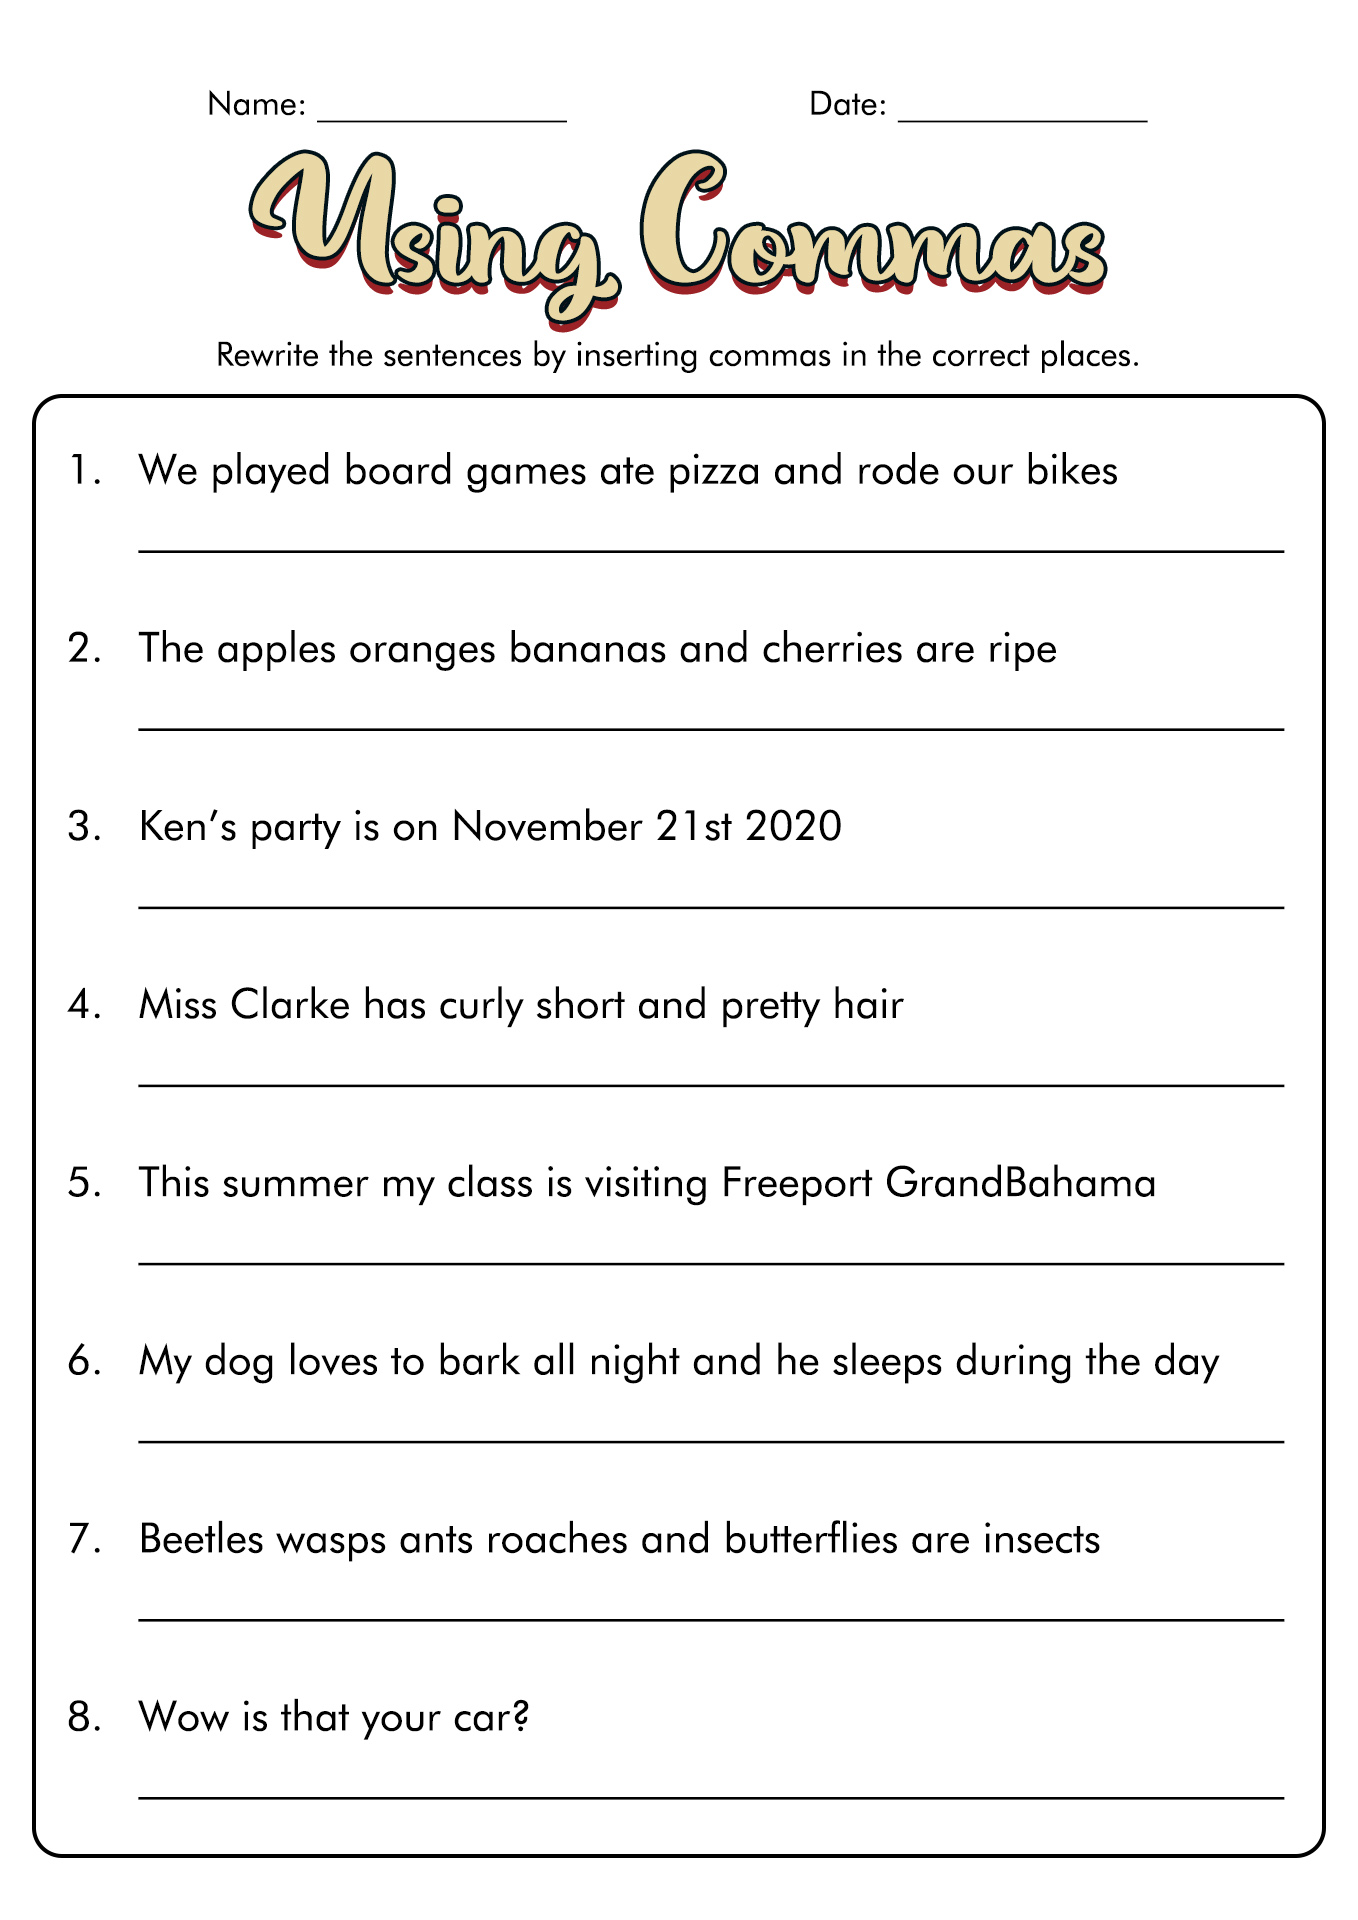 grammar-worksheets-commas-in-a-series-first-grade-free-comma-worksheets-grammar-wkst-first